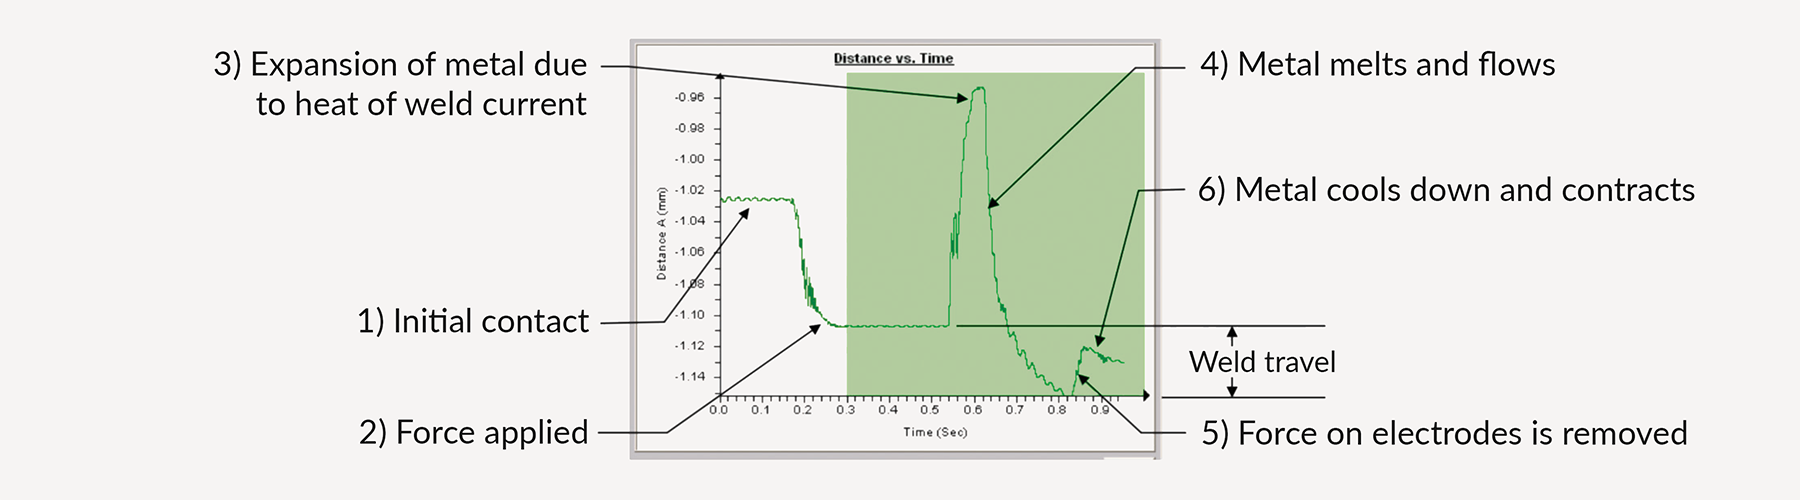 distance vs time graphic of weld process 